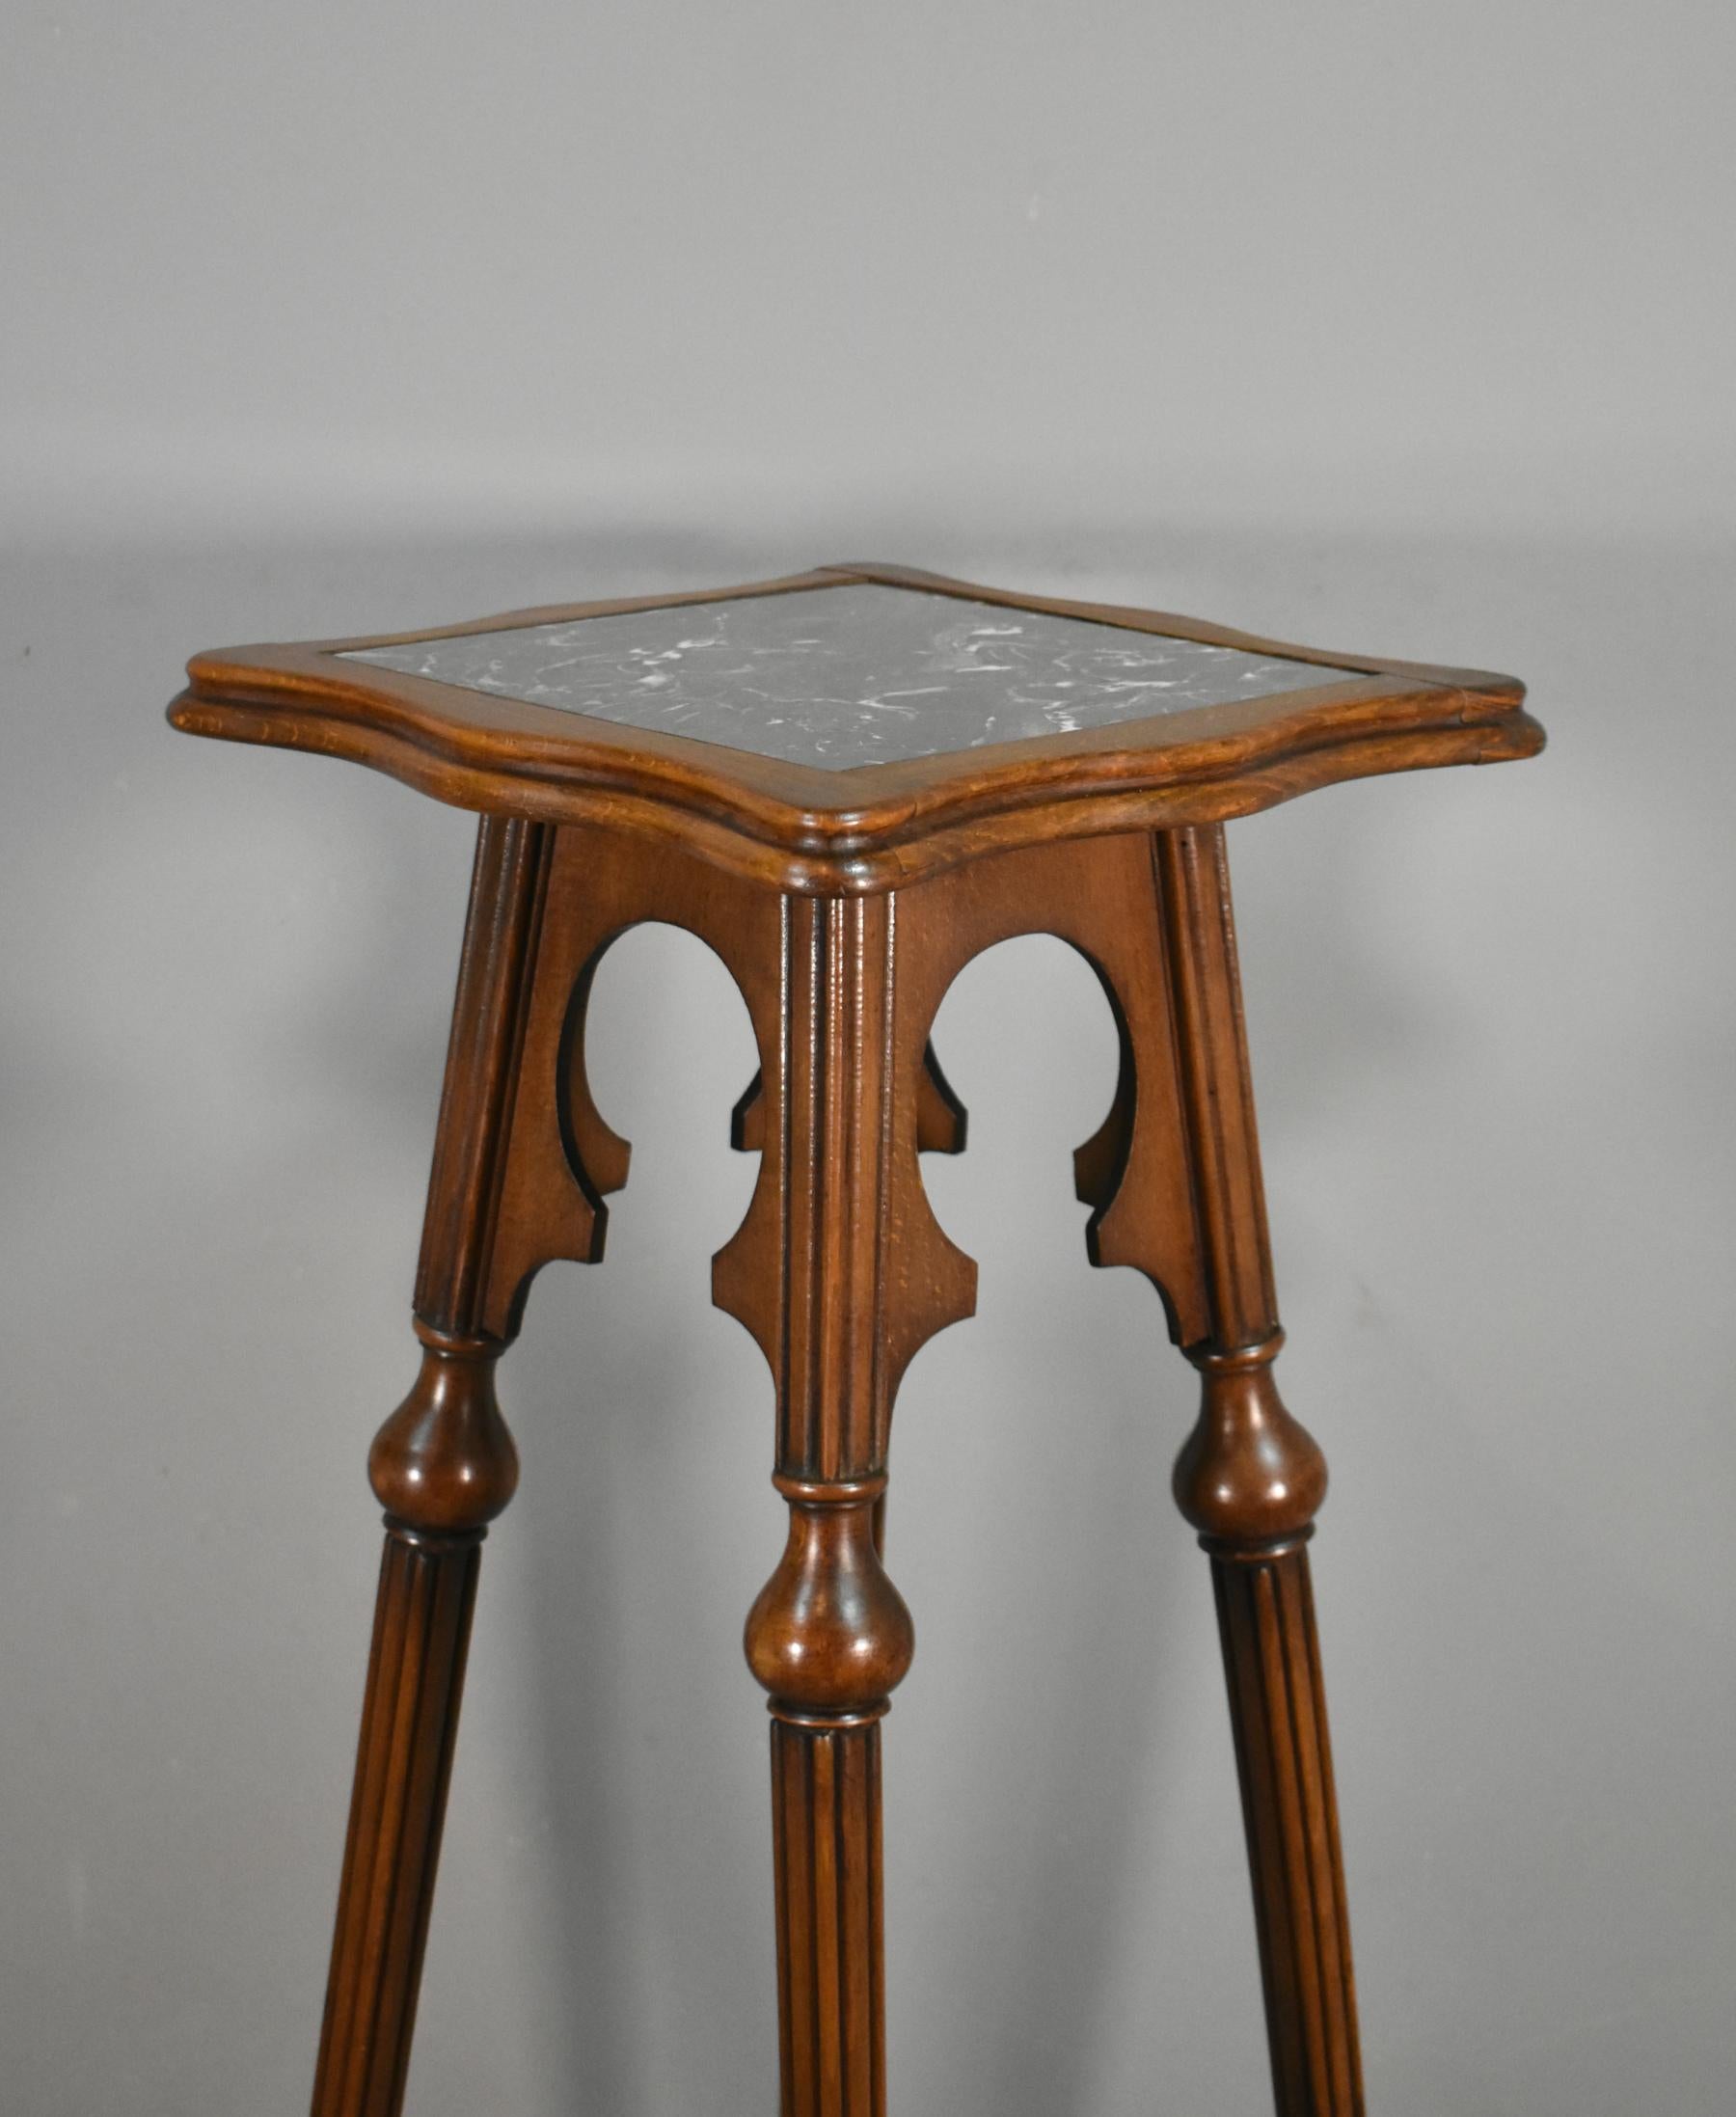 Early 20th Century French Art Nouveau Sellette For Sale